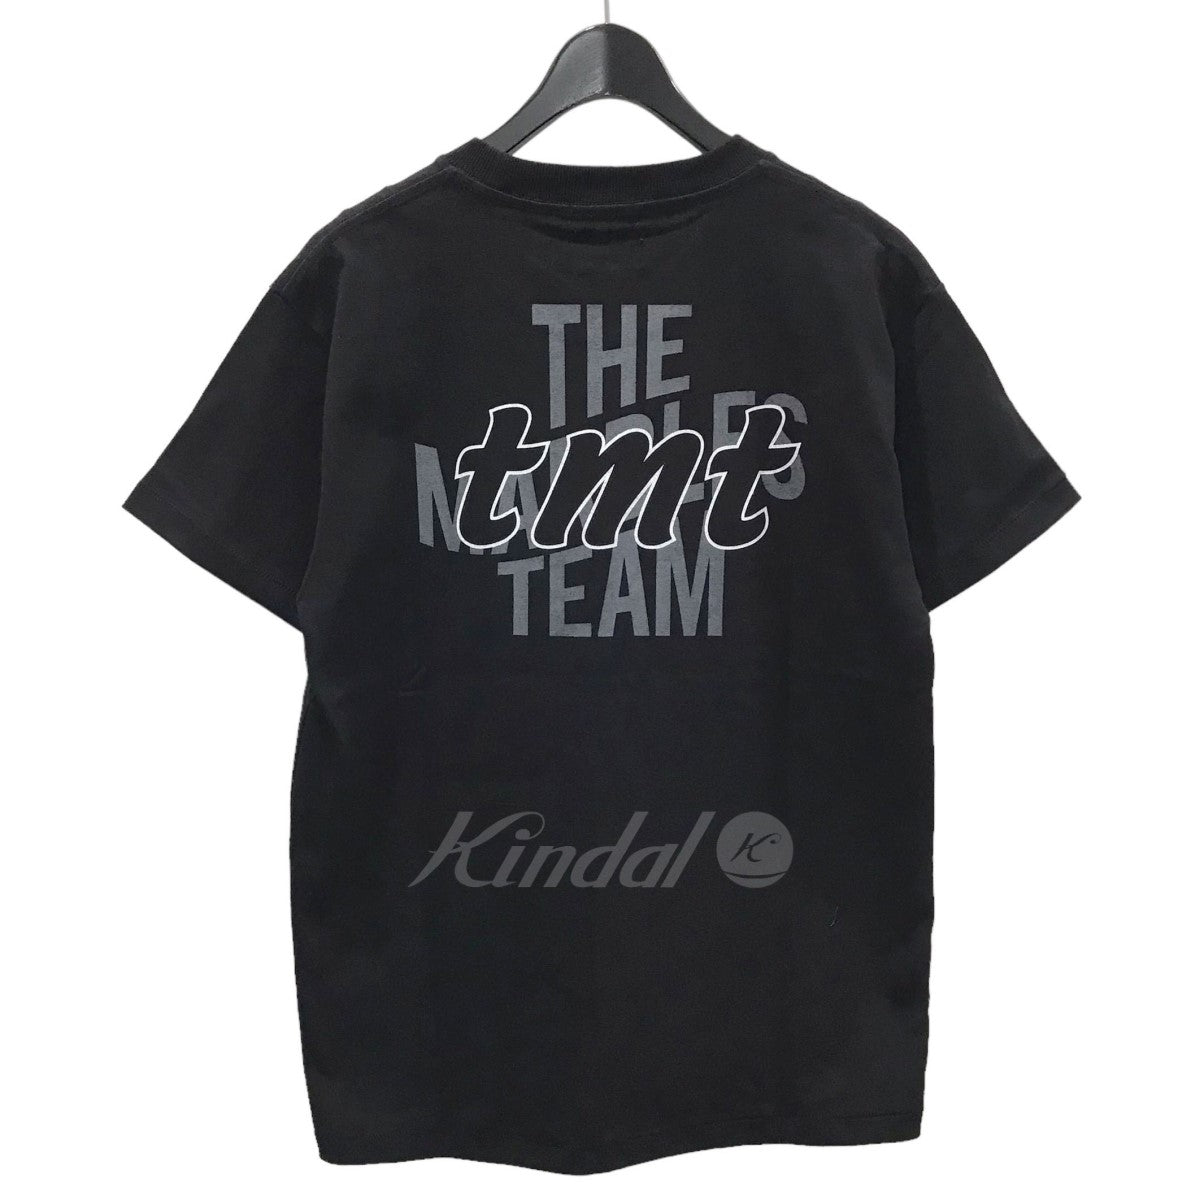 TMT(ティーエムティー) × Marbles プリントTシャツ S／S T-SHIRTS THE MARBLES TEAM